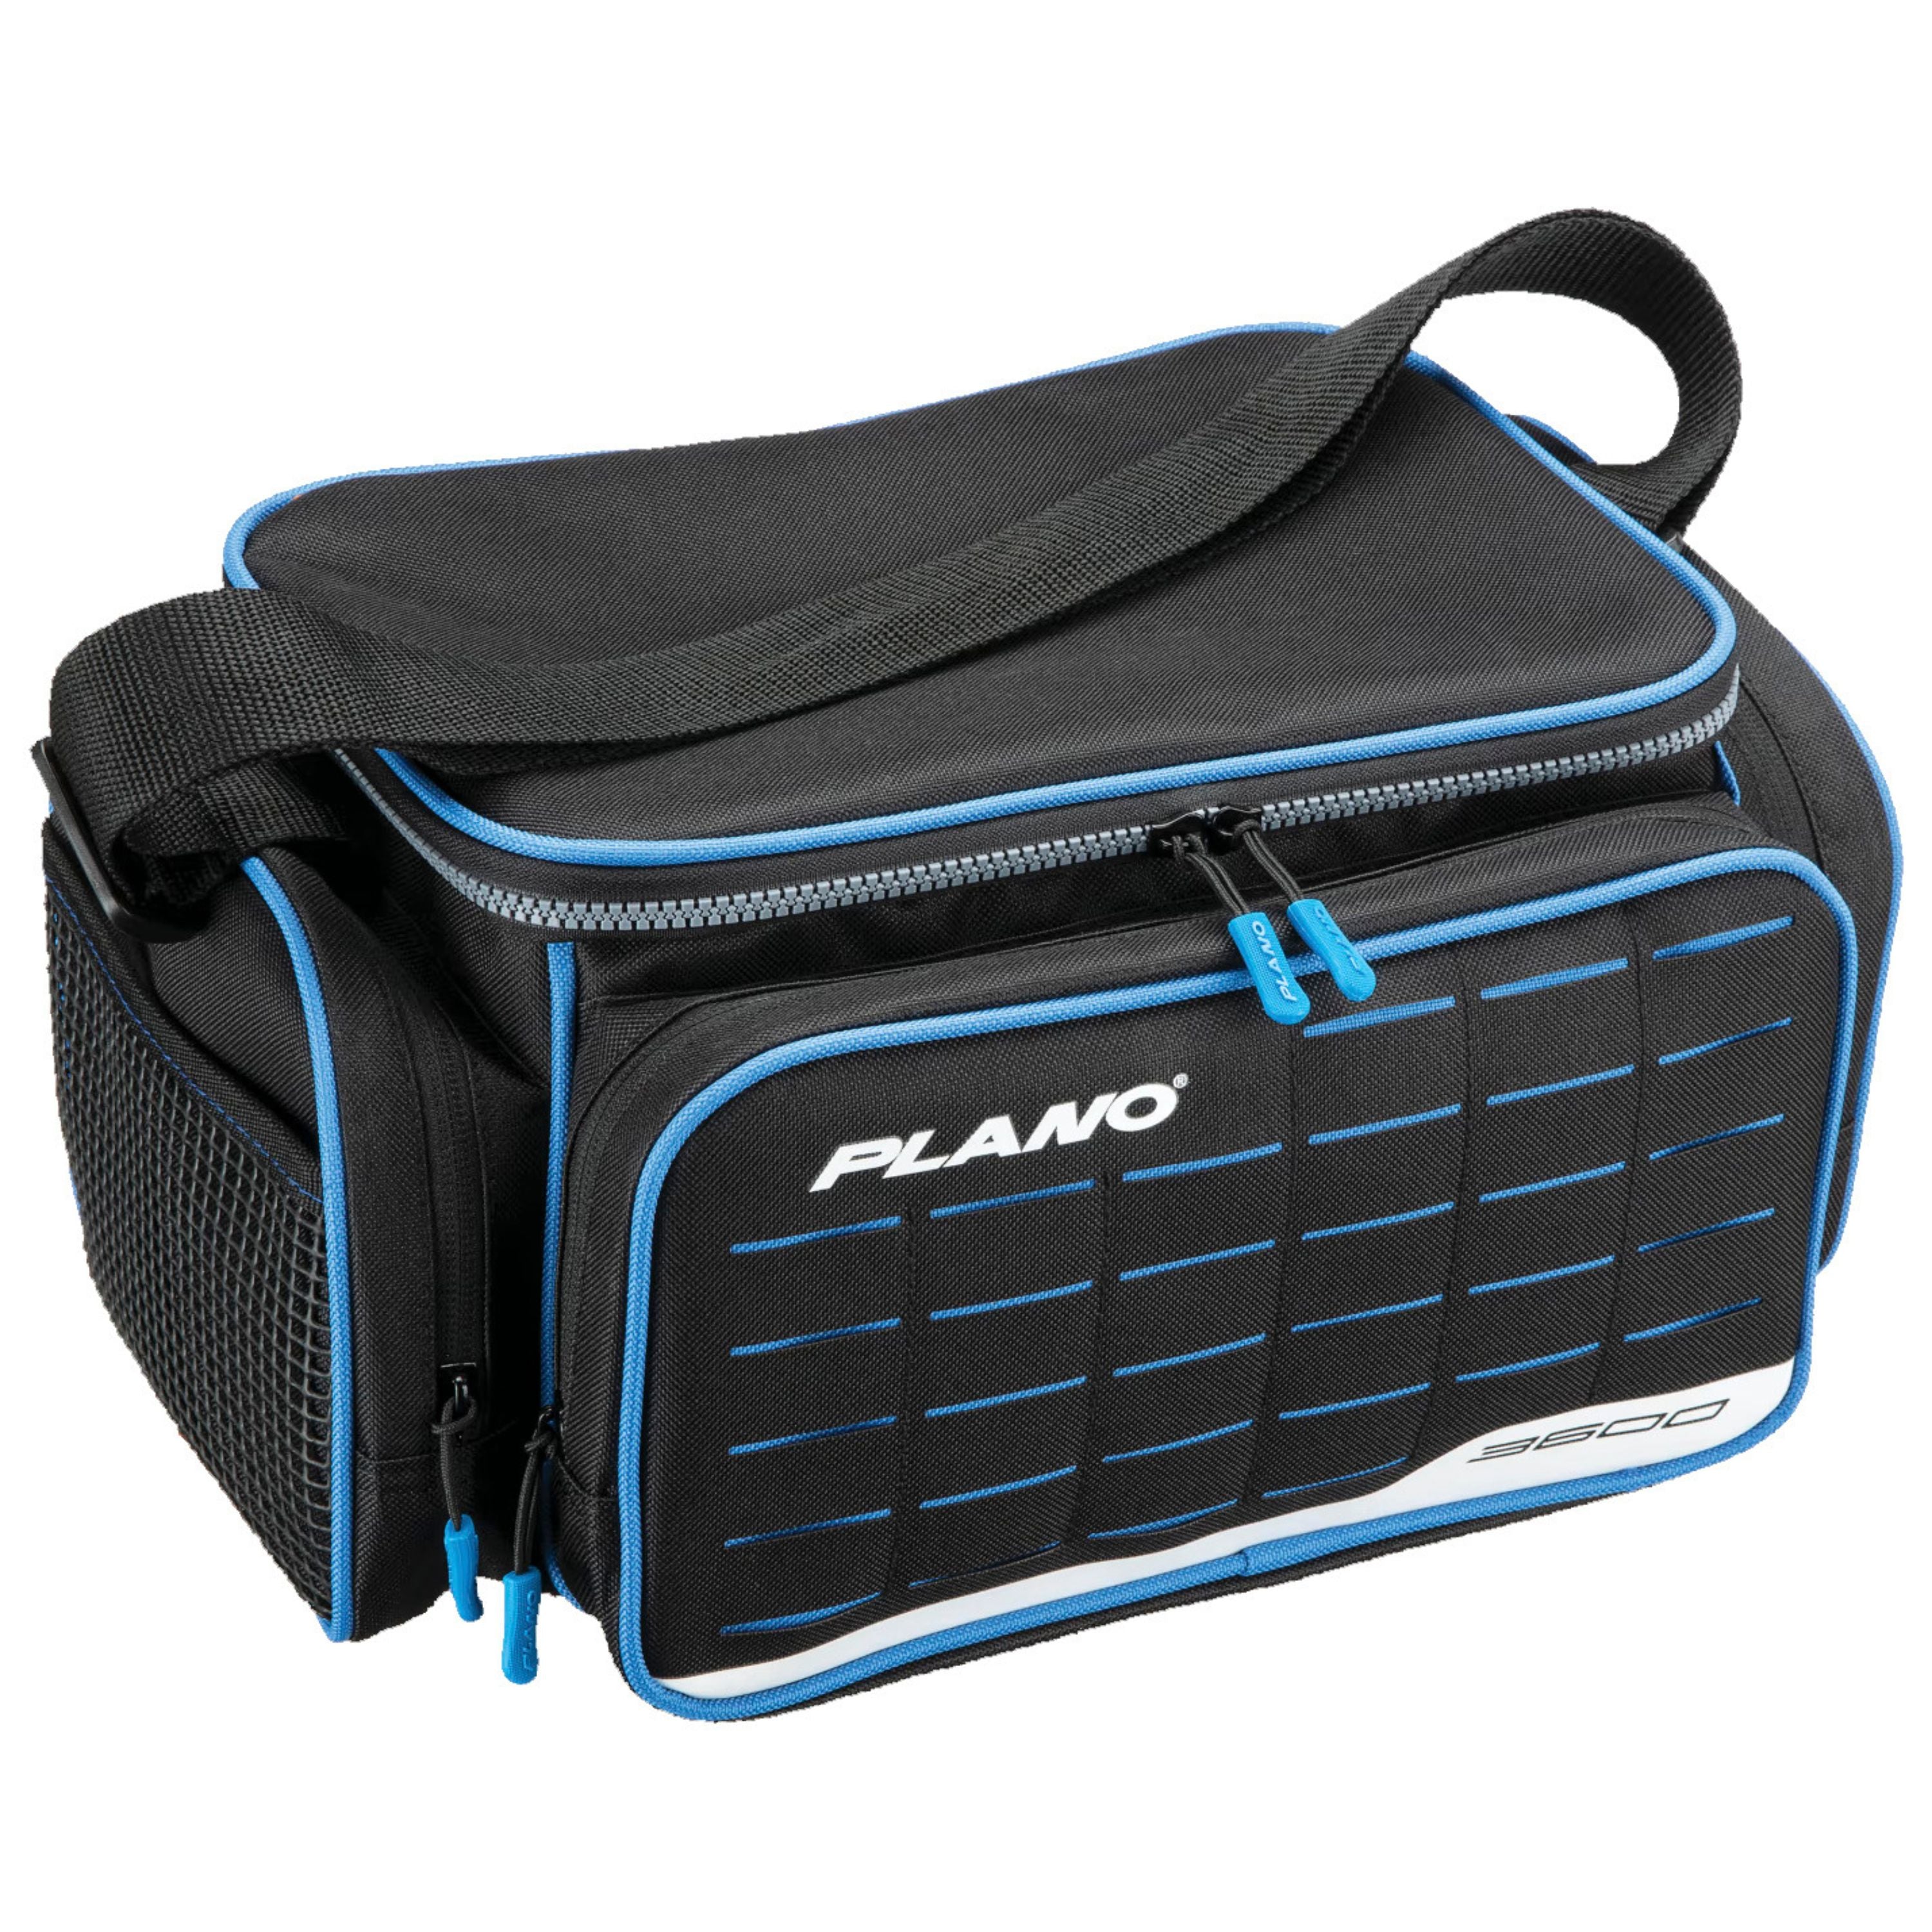 "Weekend 3600" Fishing bag with trays